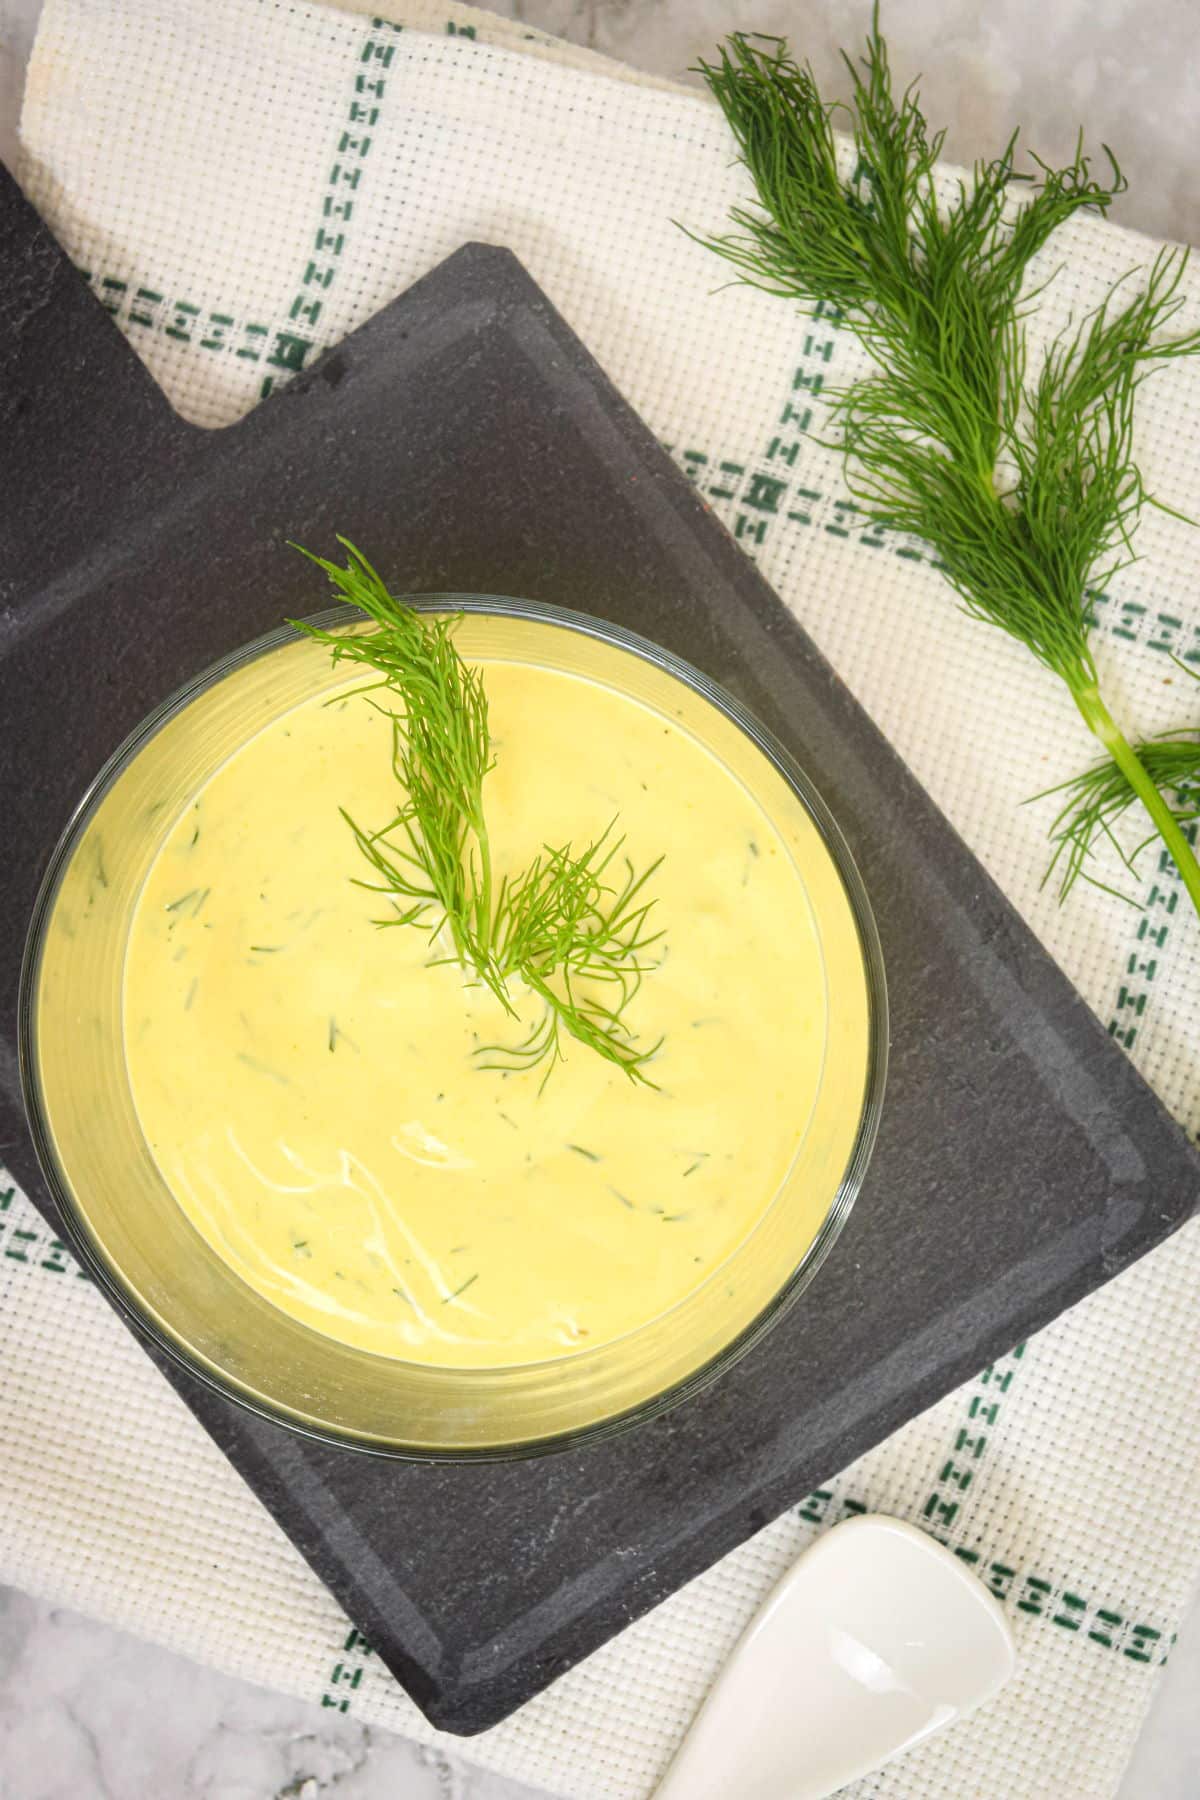 Dill dip in a glass serving dish with fresh dill sprigs.